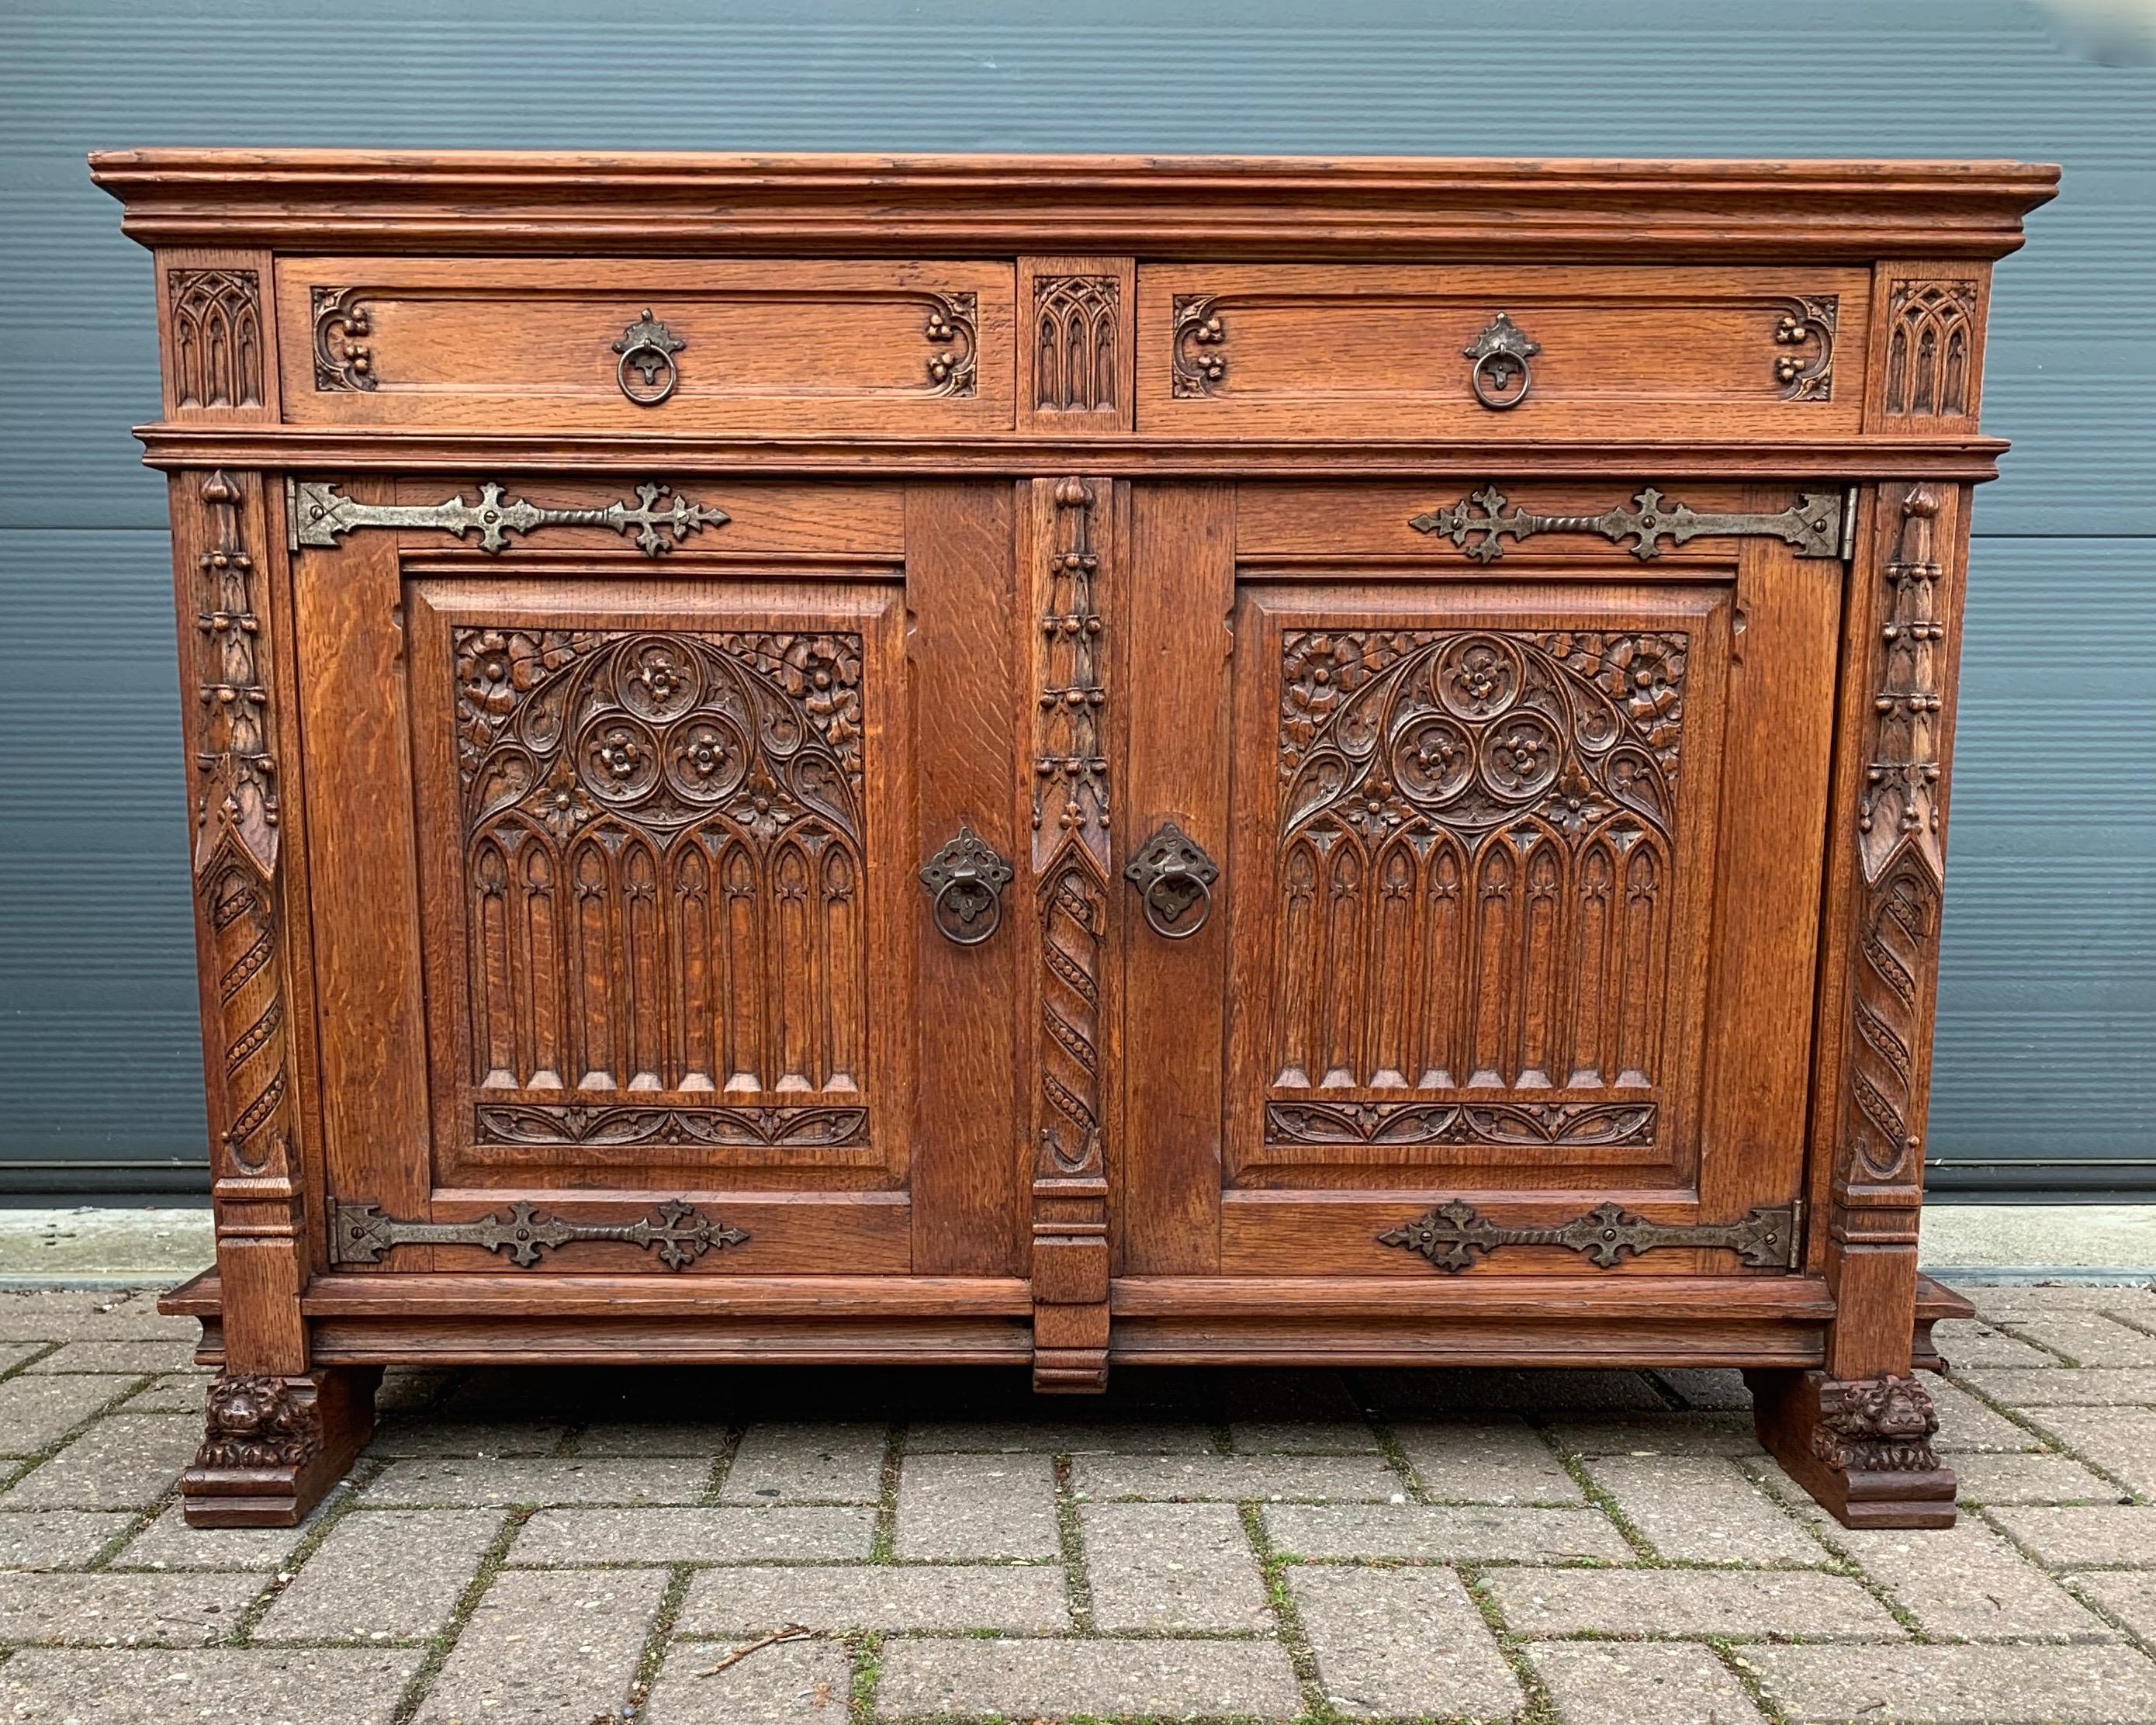 Early 20th century, solid tiger oak Gothic cabinet with lion sculptures on its feet.

This beautifully and deeply carved tiger oak cabinet from the early 1900s is in excellent condition. It comes with top quality, hand carved details and the warmest